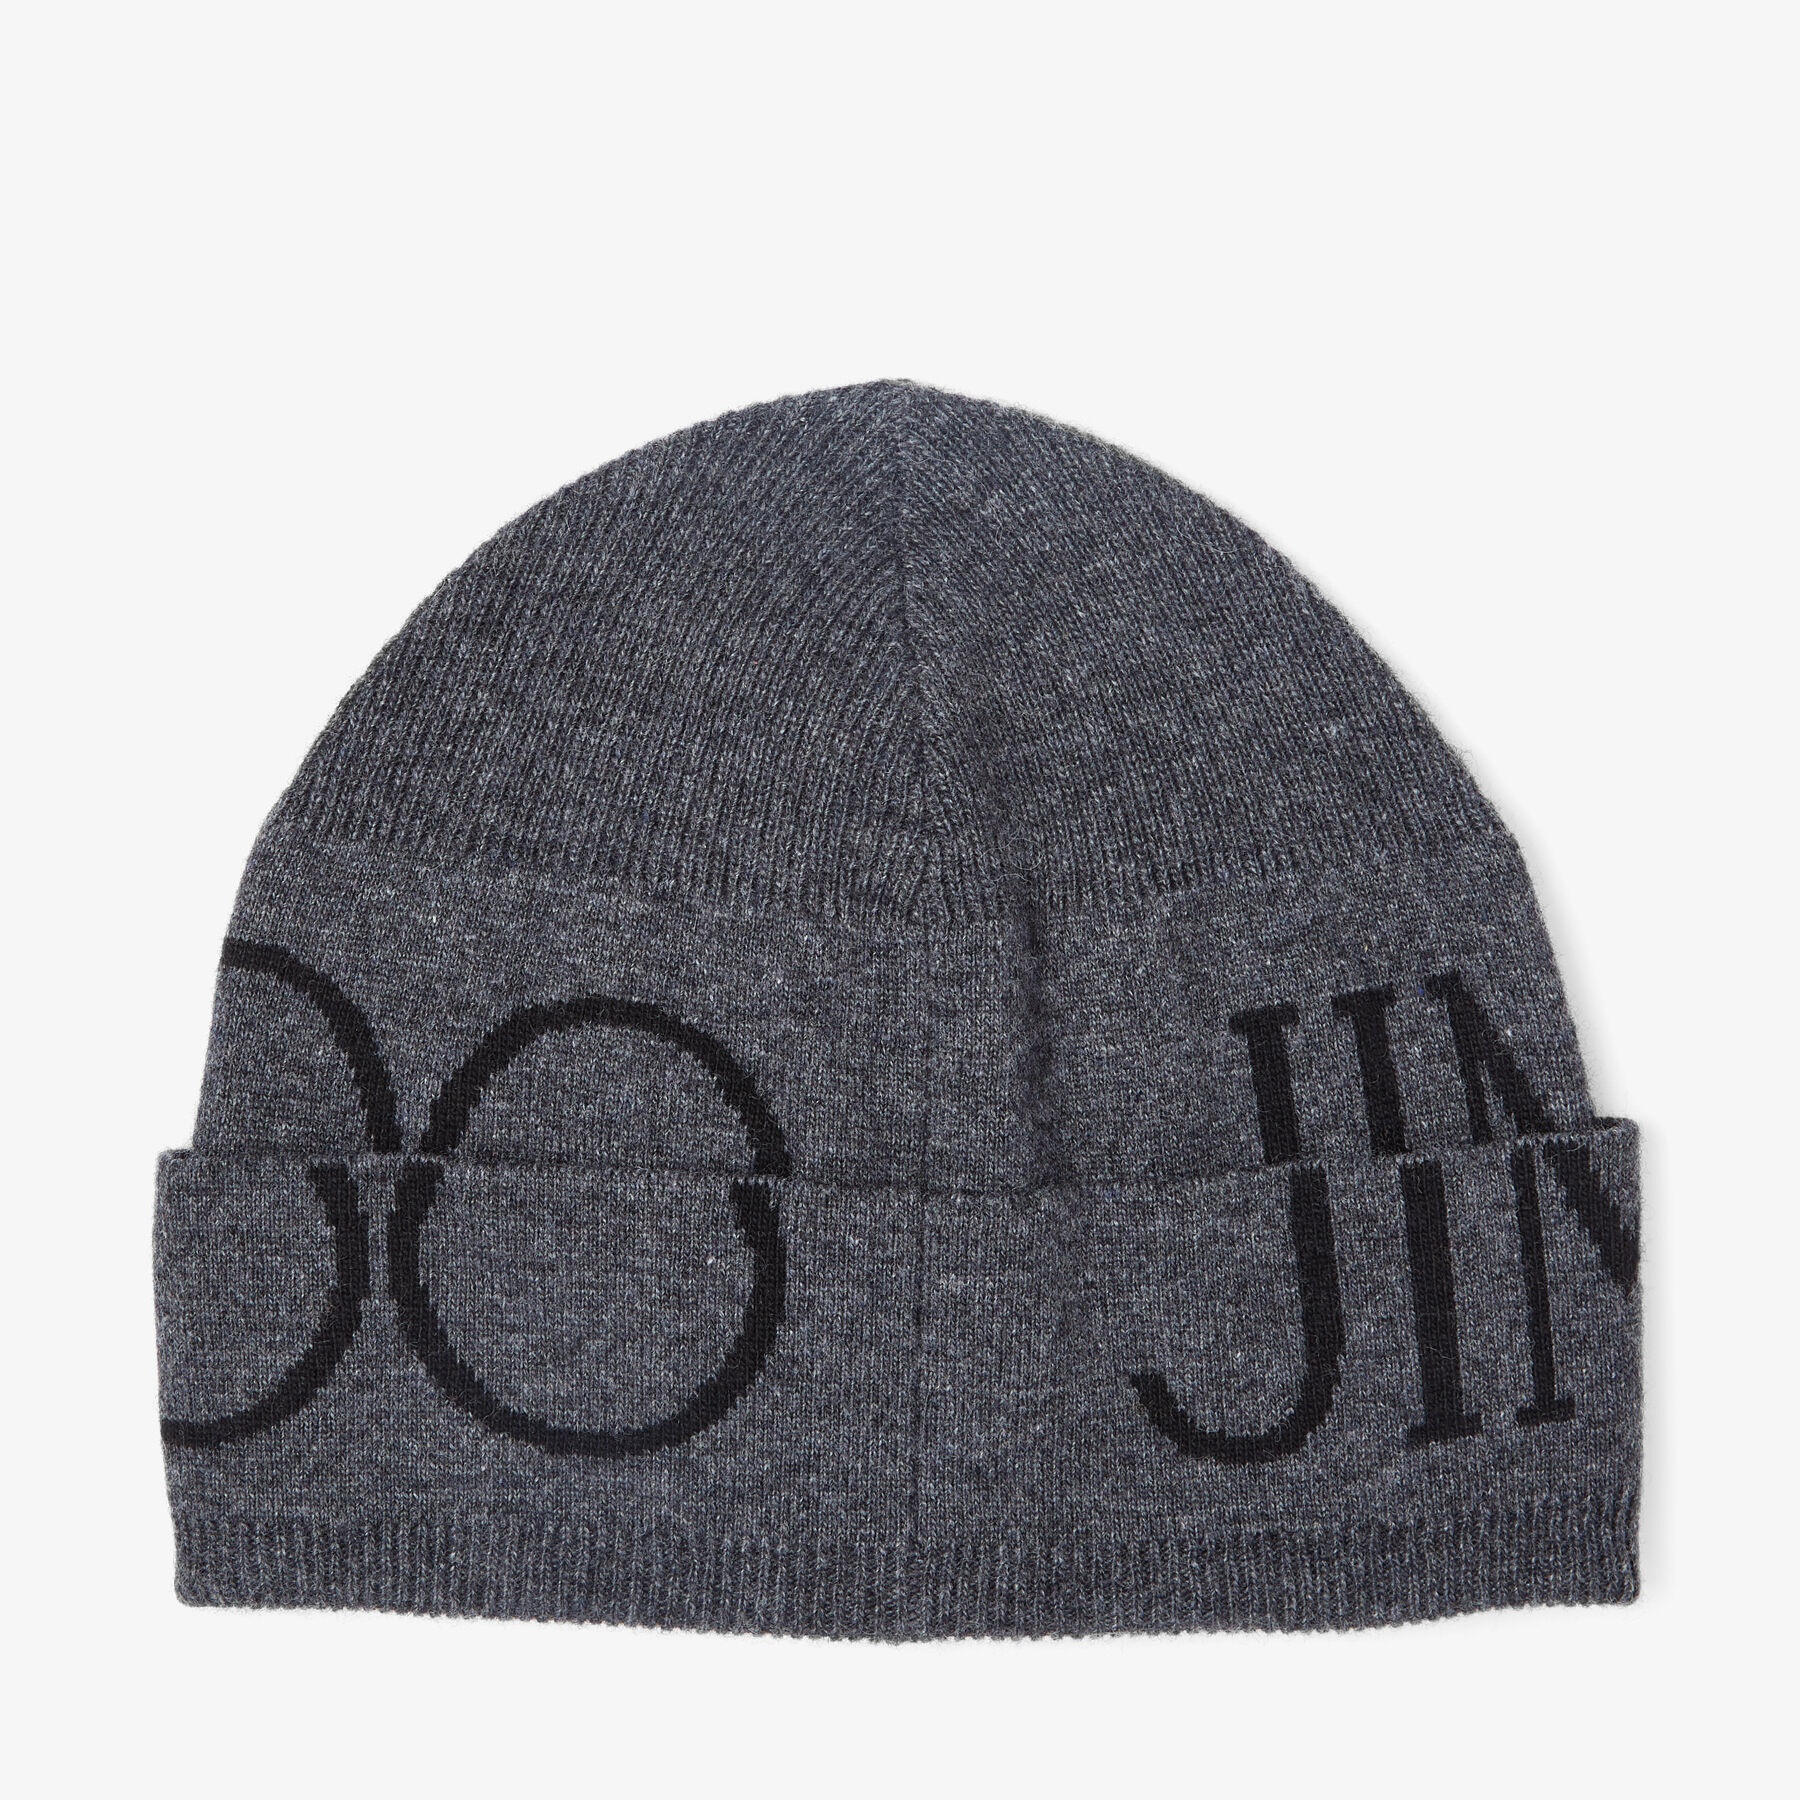 Jens
Marl Grey Wool and Cashmere Hat with Black Jimmy Choo Logo - 2